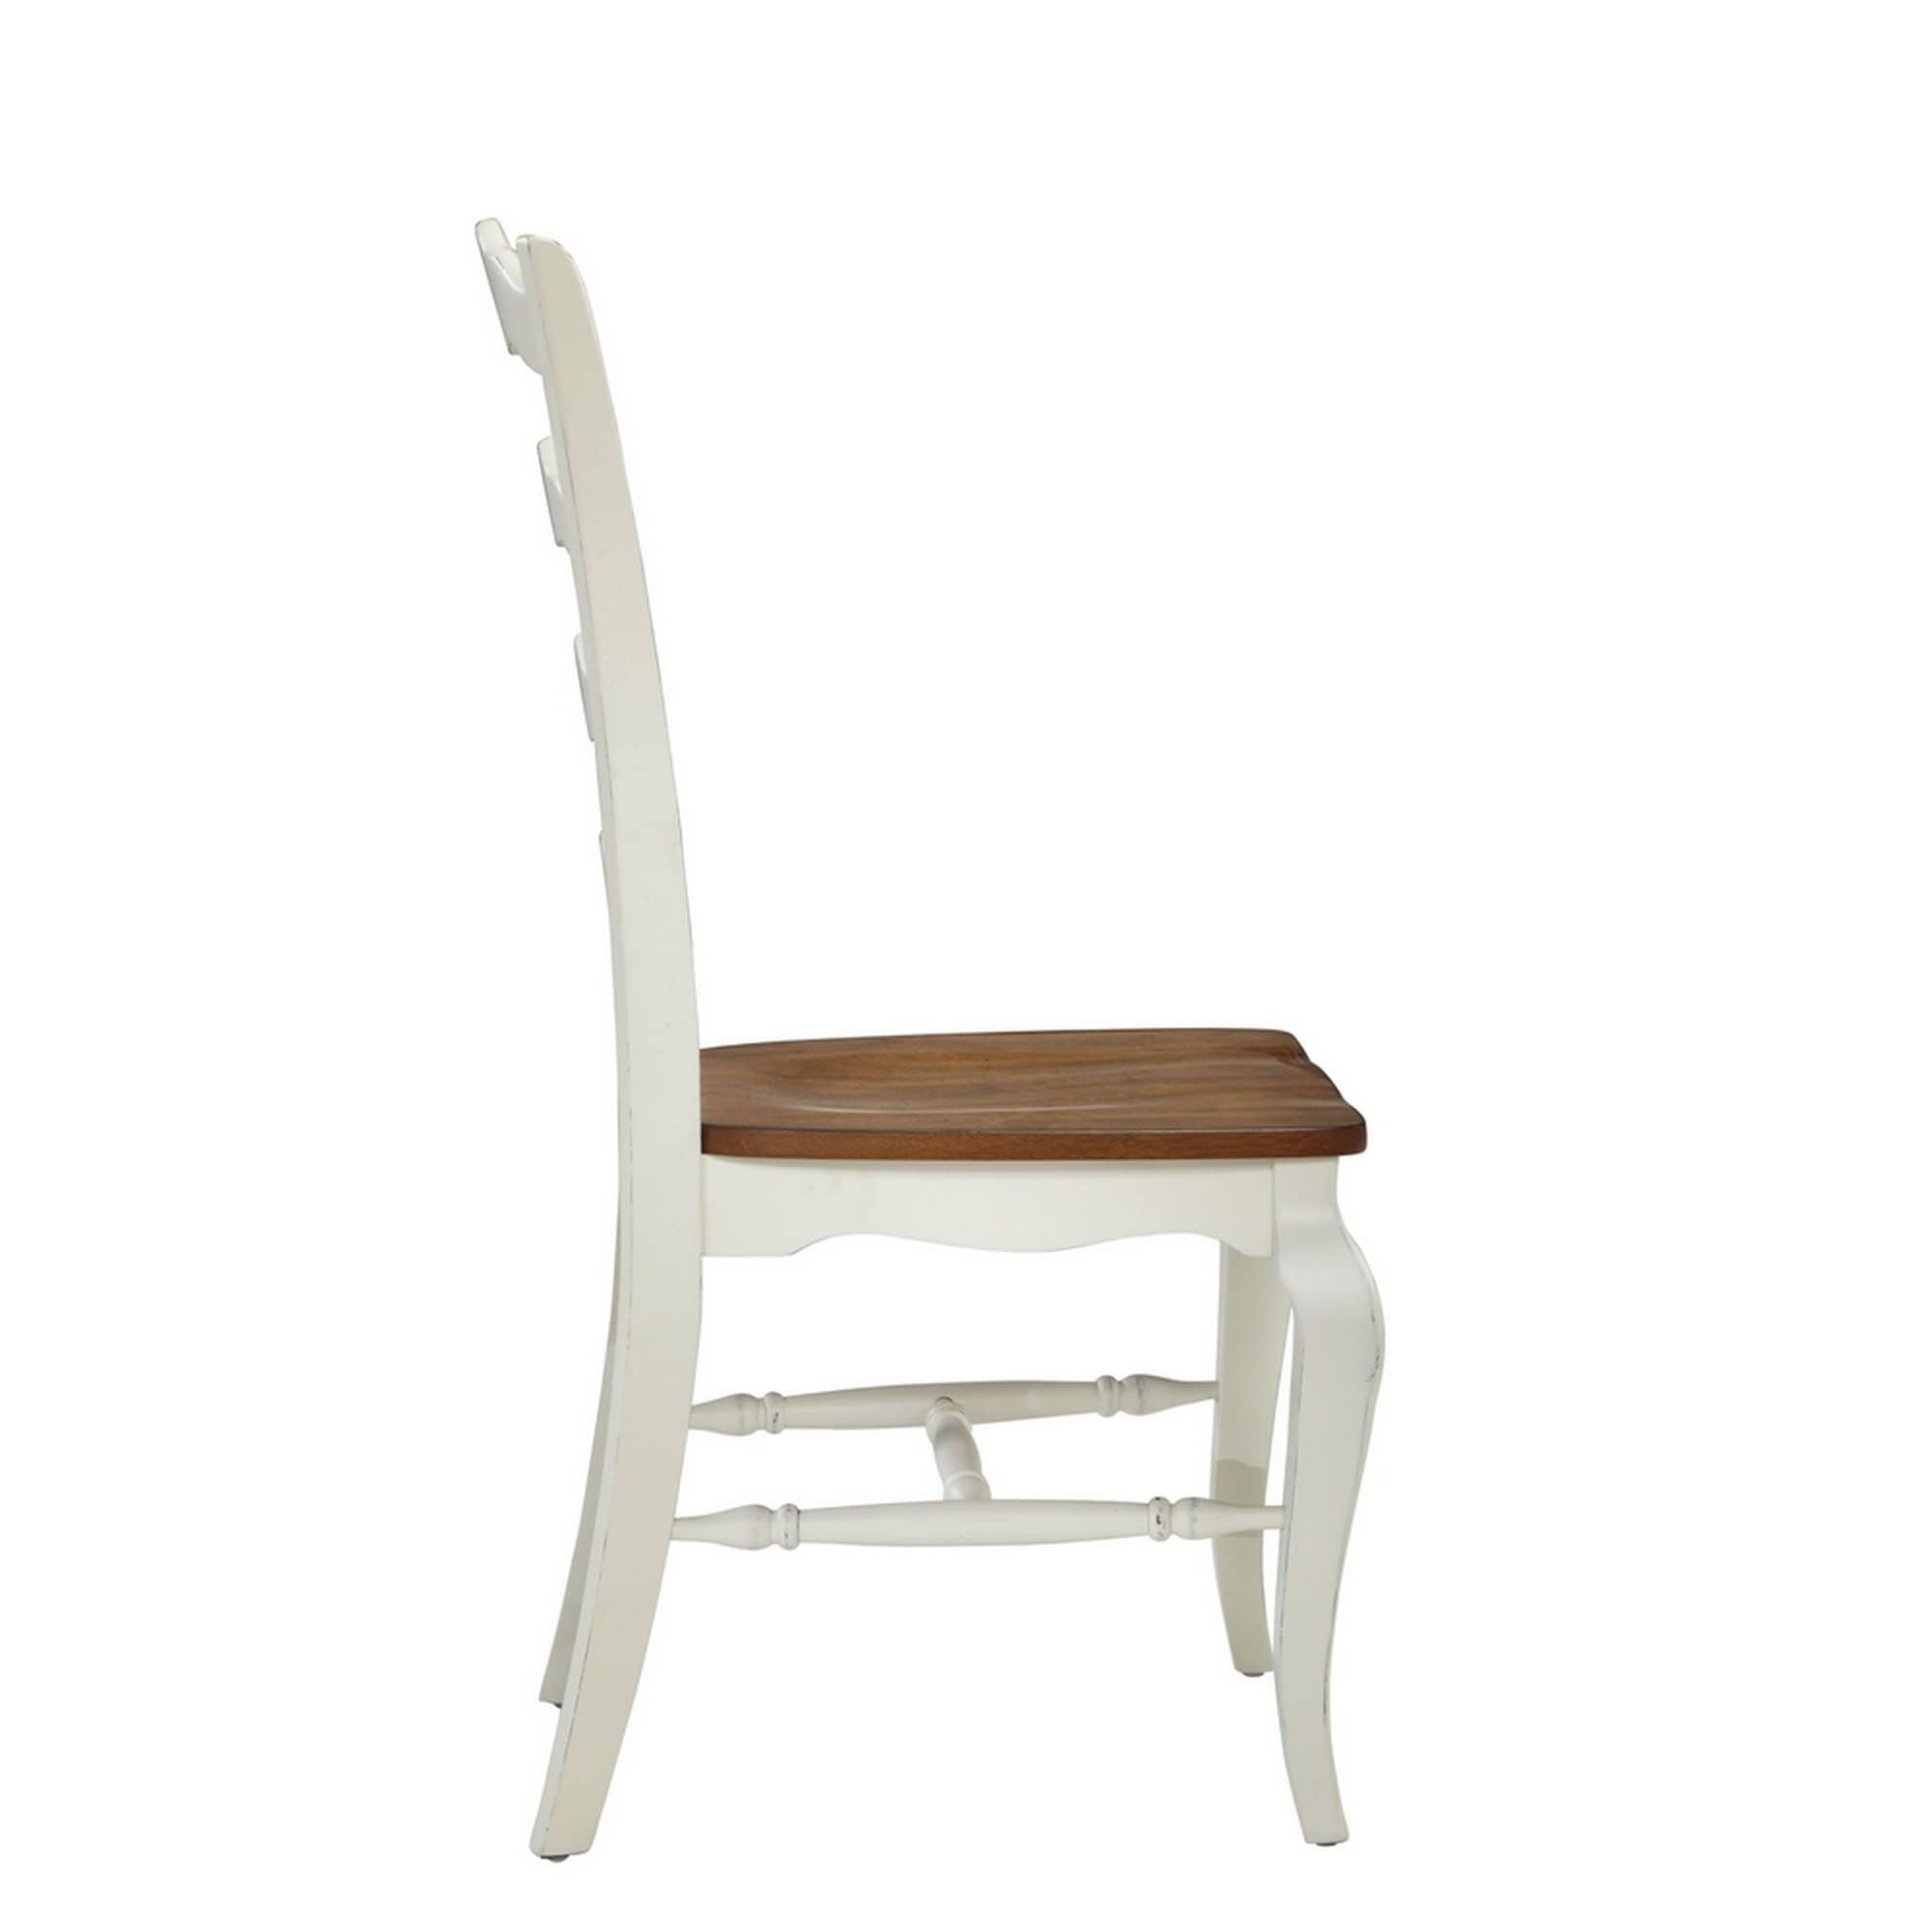 Traditional Dining Chair Pair By French Countryside Dining Chair French Countryside